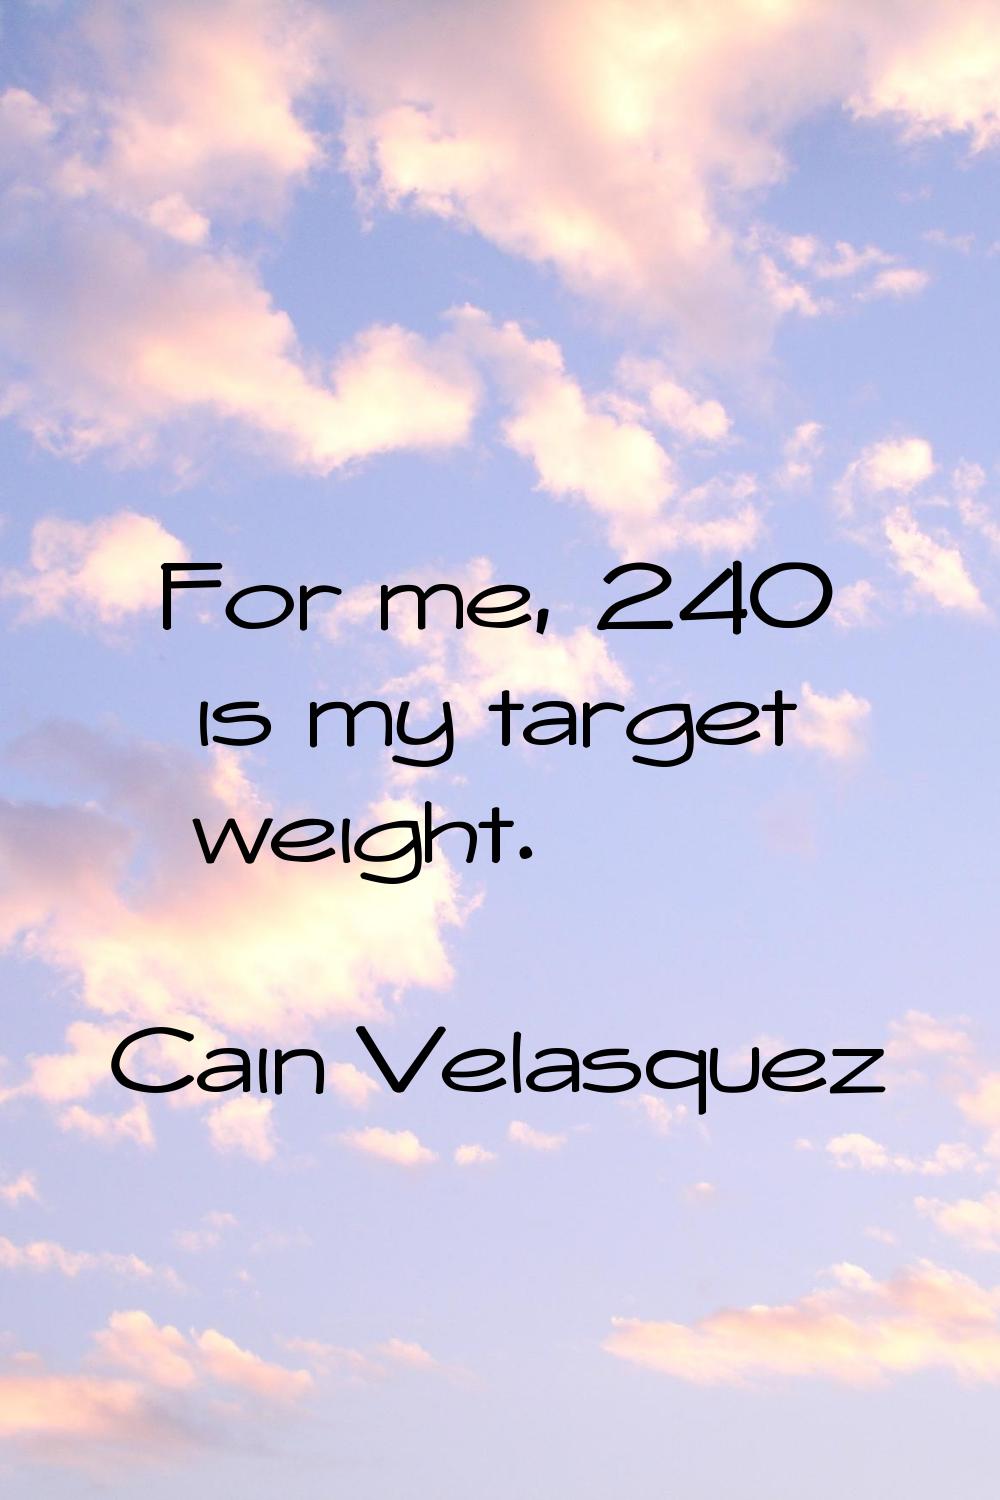 For me, 240 is my target weight.